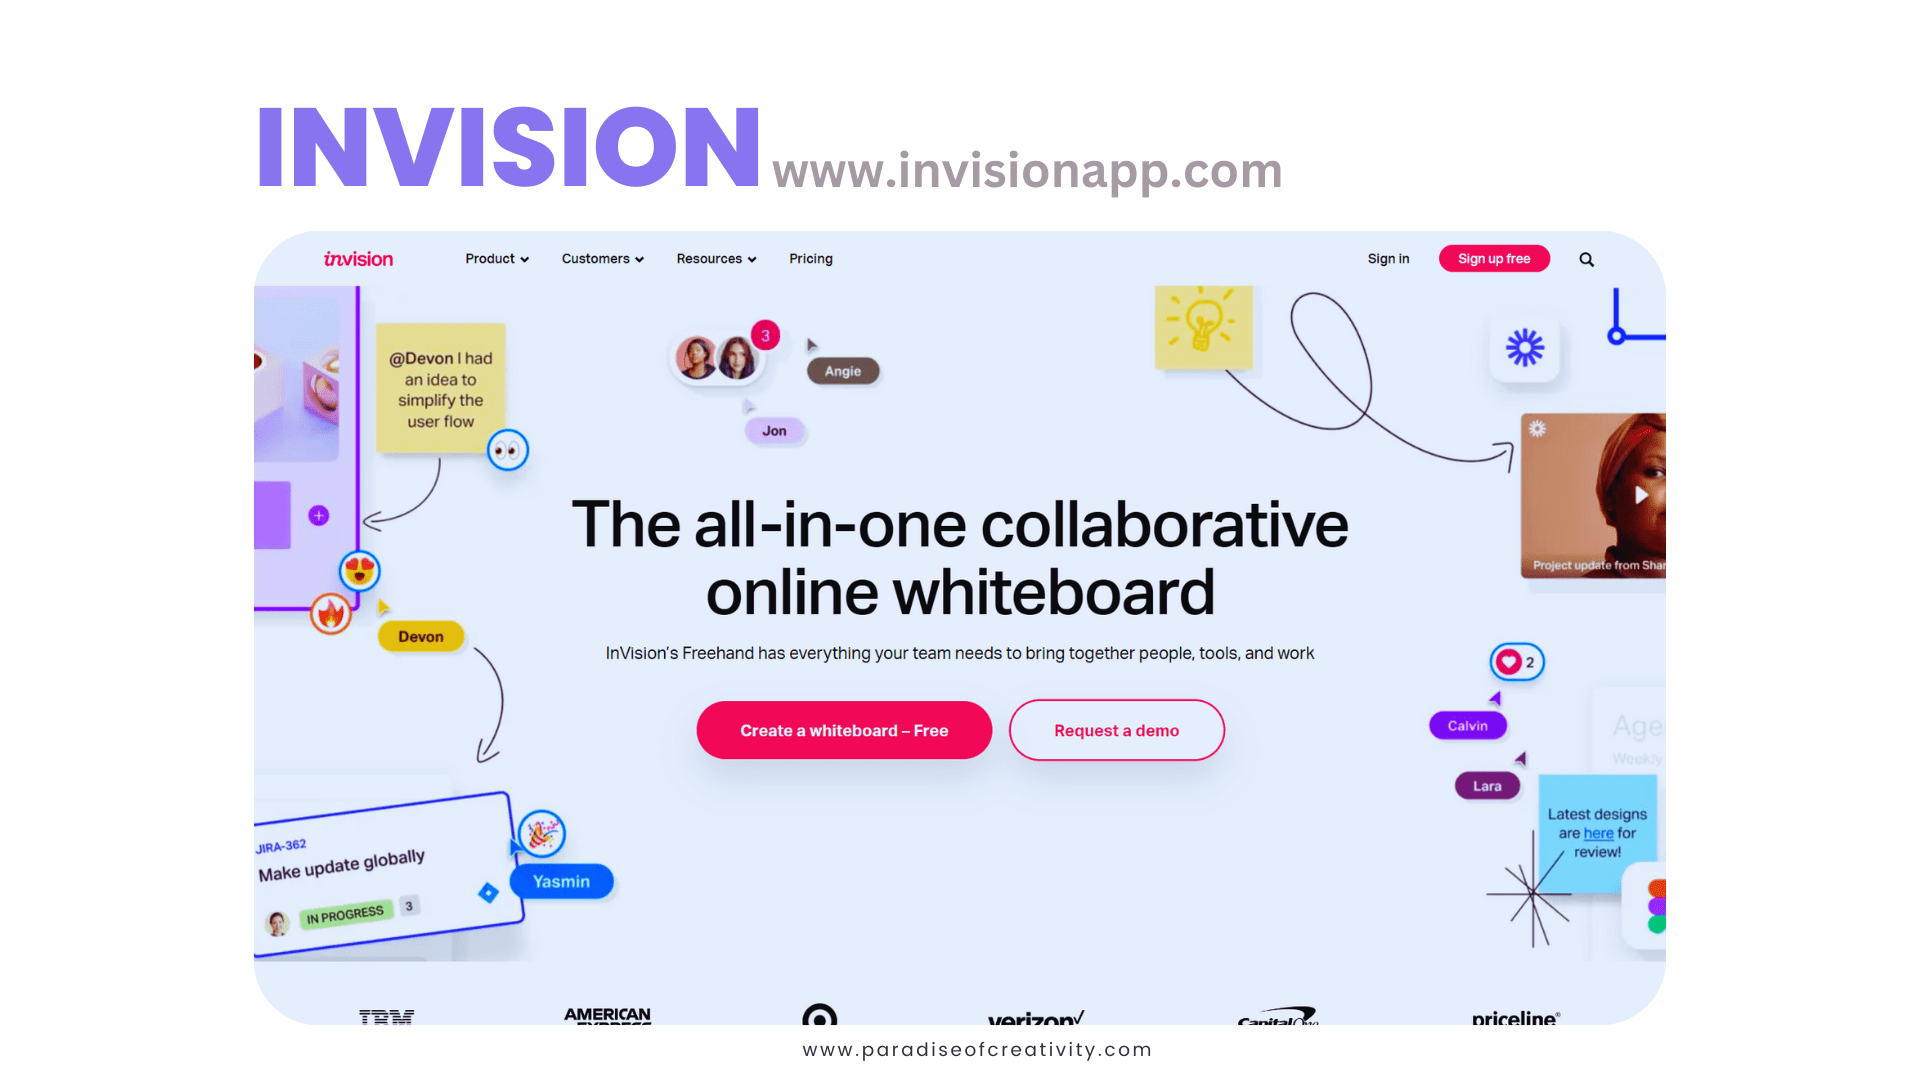 InVision is the visual collaboration platform powering the world’s smartest companies.